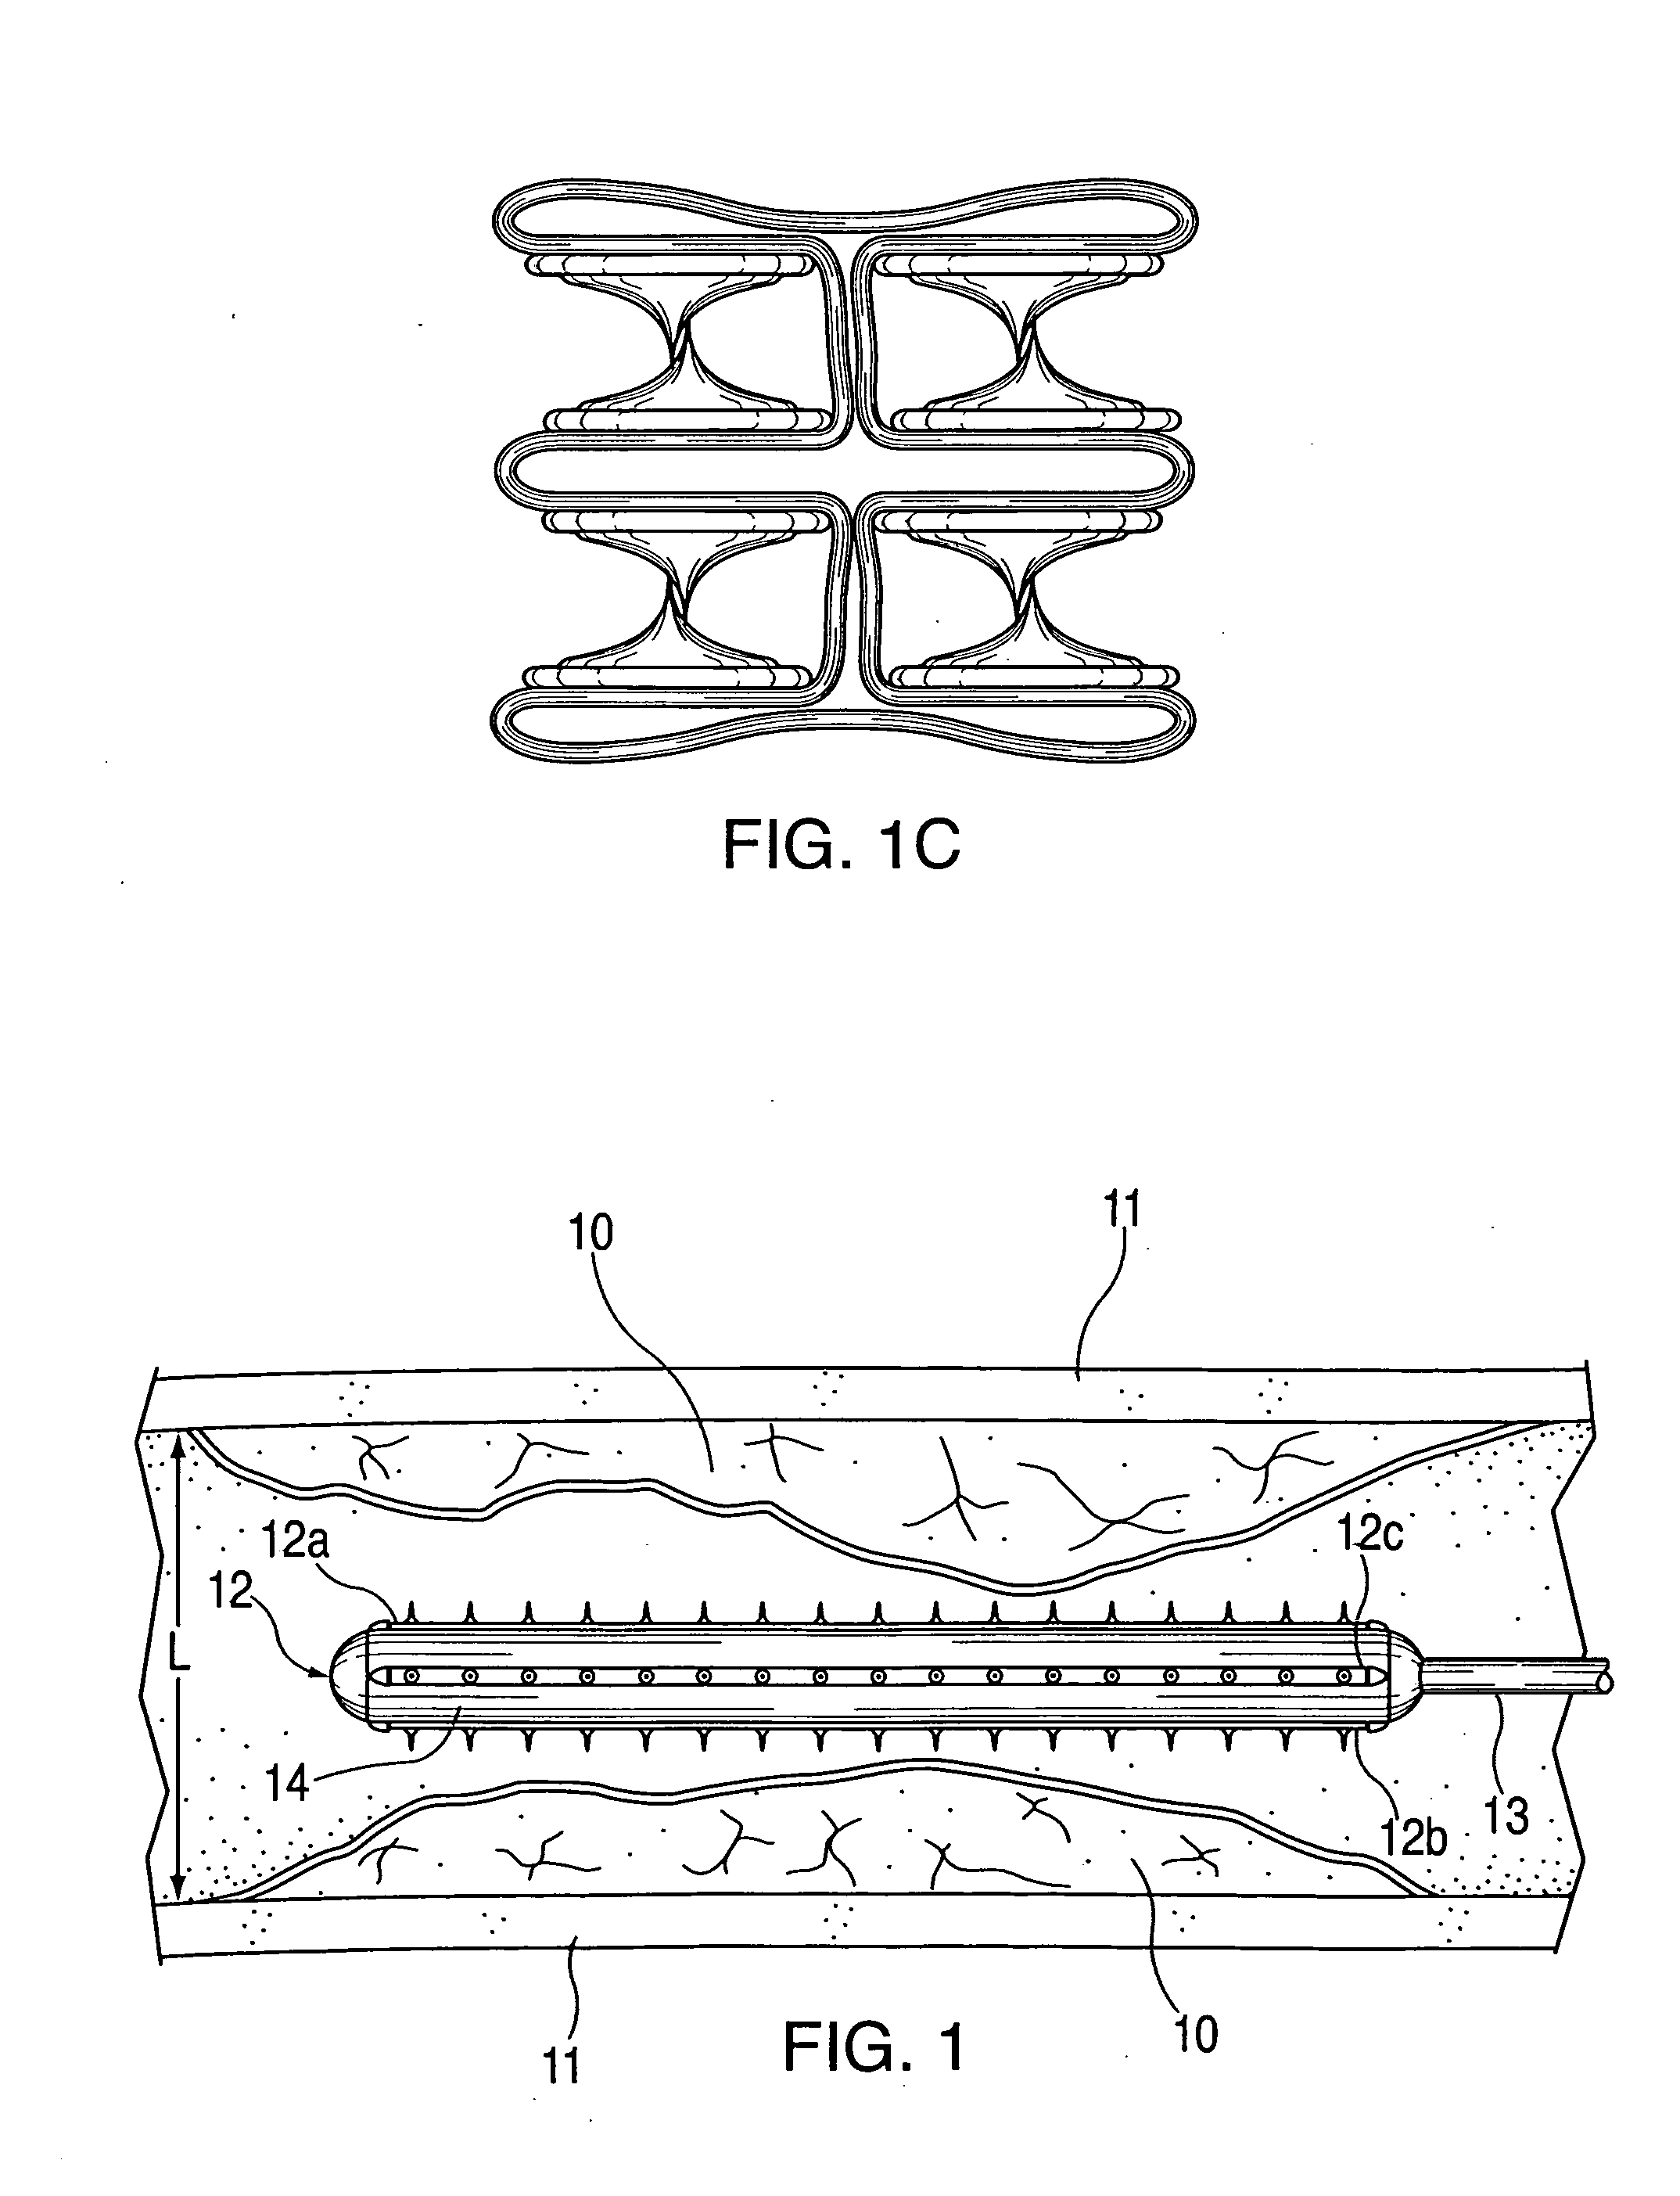 Device and method for opening blood vessels by pre-angioplasty serration and dilatation of atherosclerotic plaque